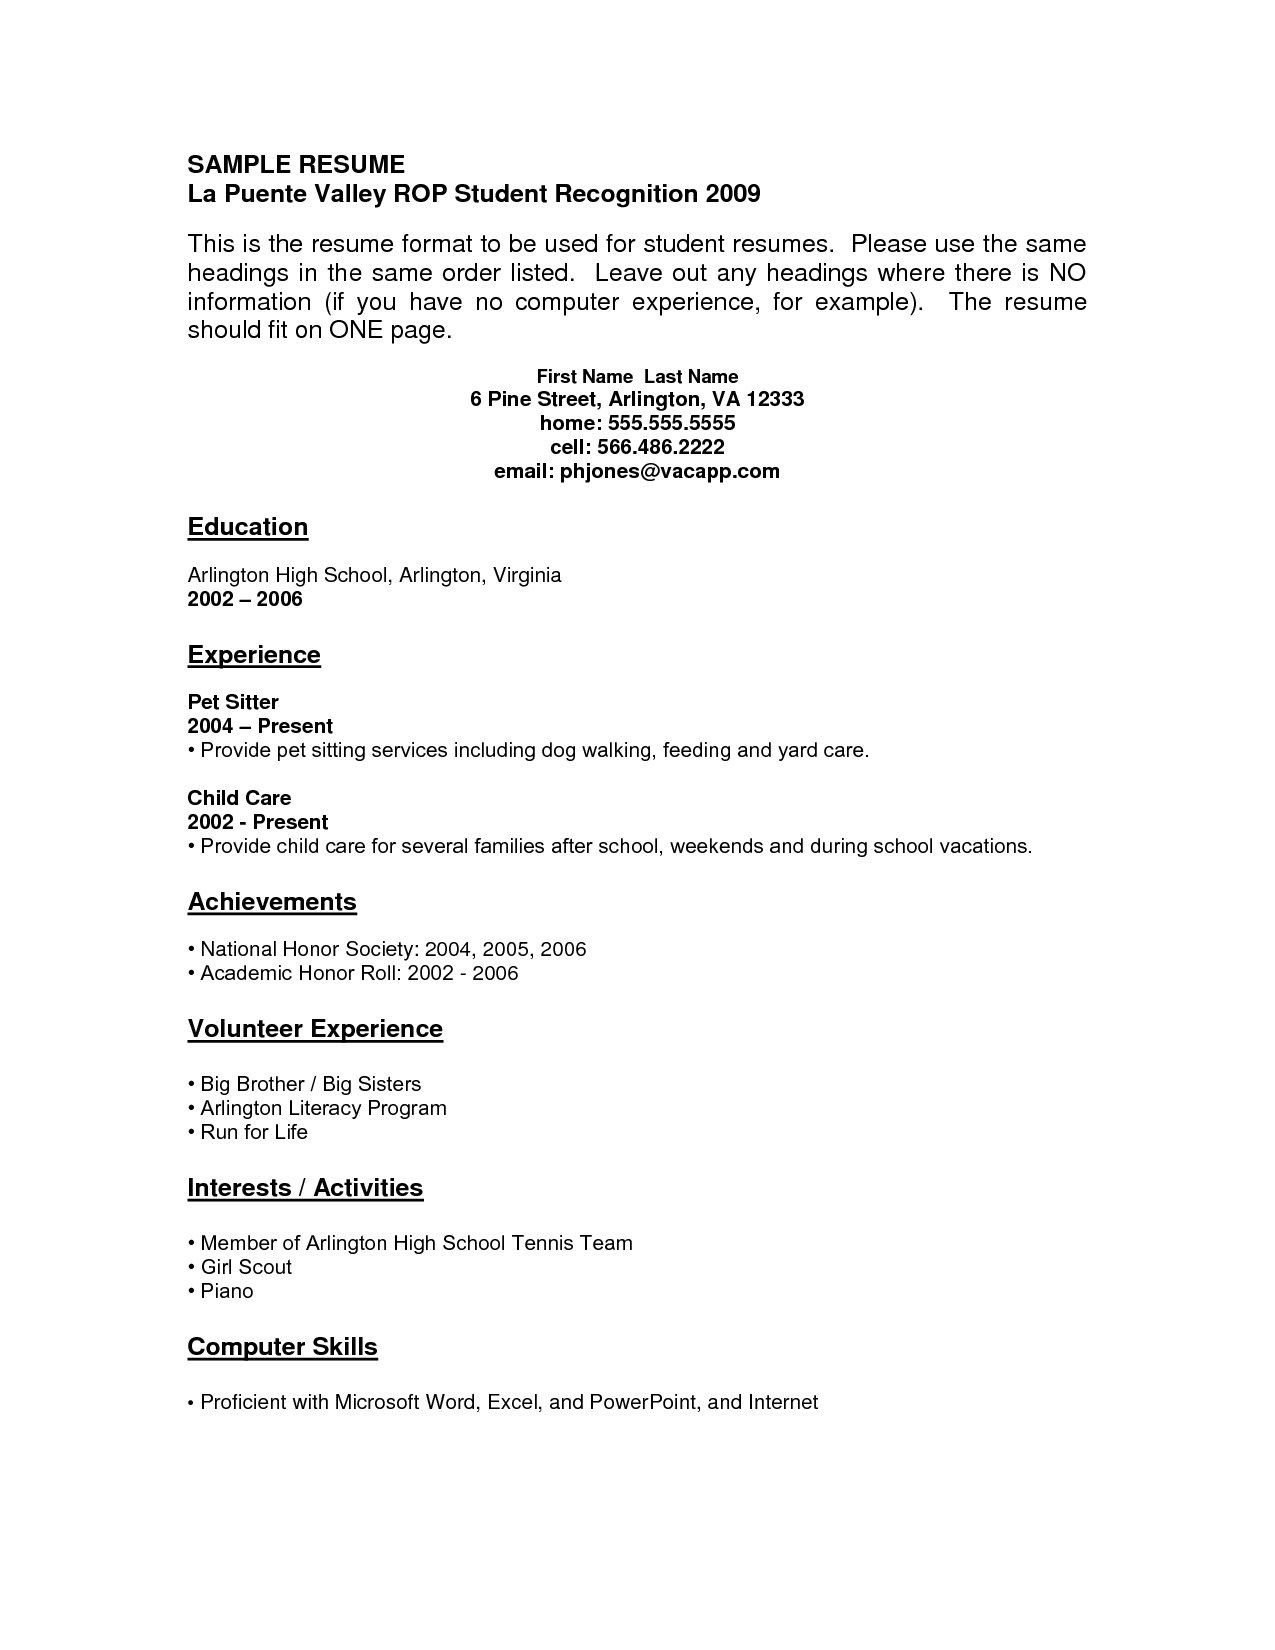 Resume for Students with No Work Experience Template Resume Examples with No Job Experience – Resume Templates Job …